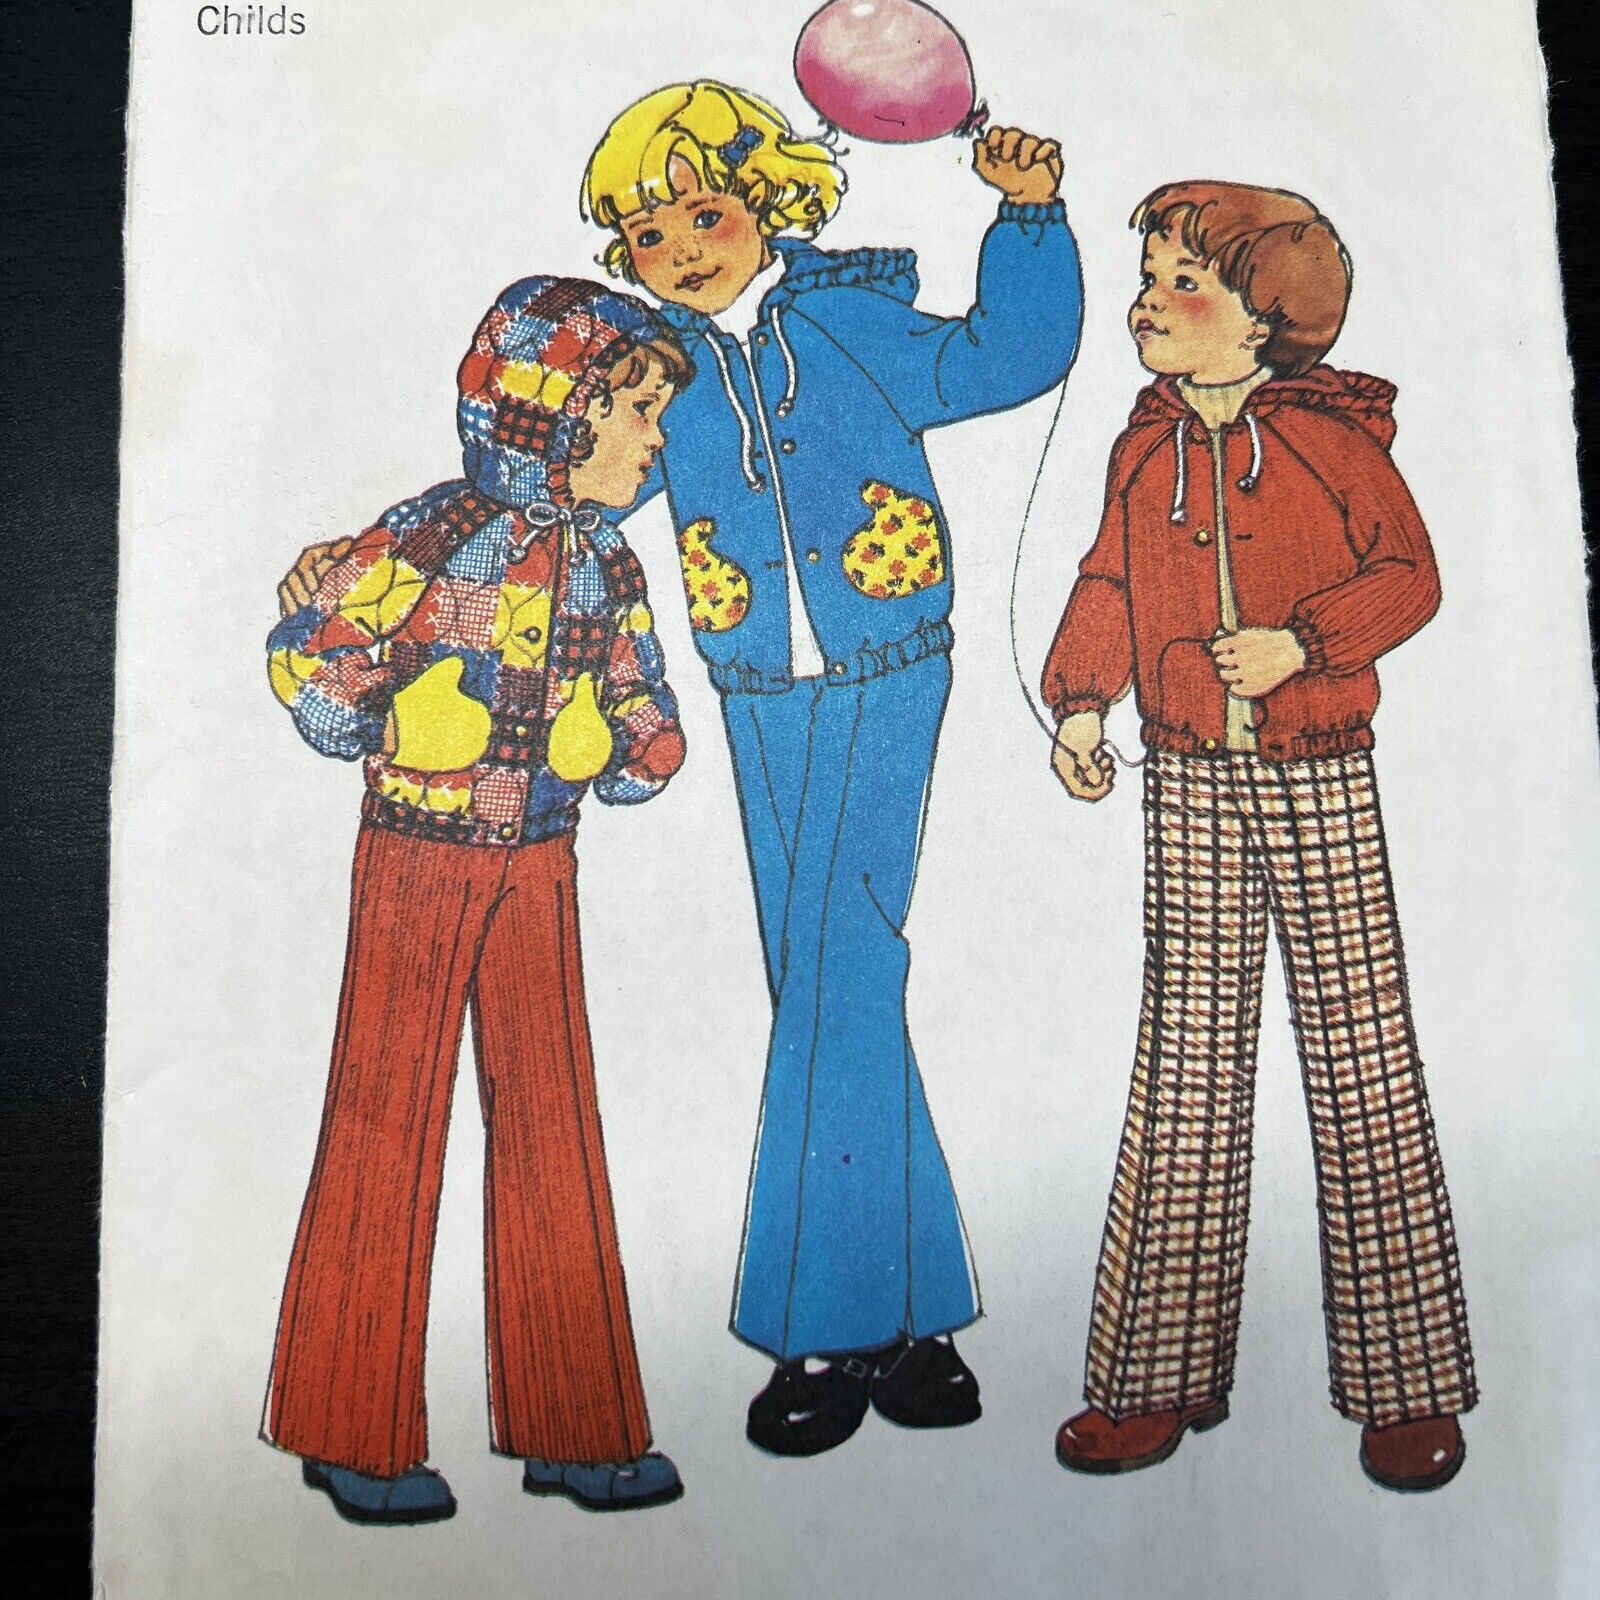 Vintage 1970s Simplicity 8713 Childs Hooded Jacket + Pants Sewing Pattern 6X CUT